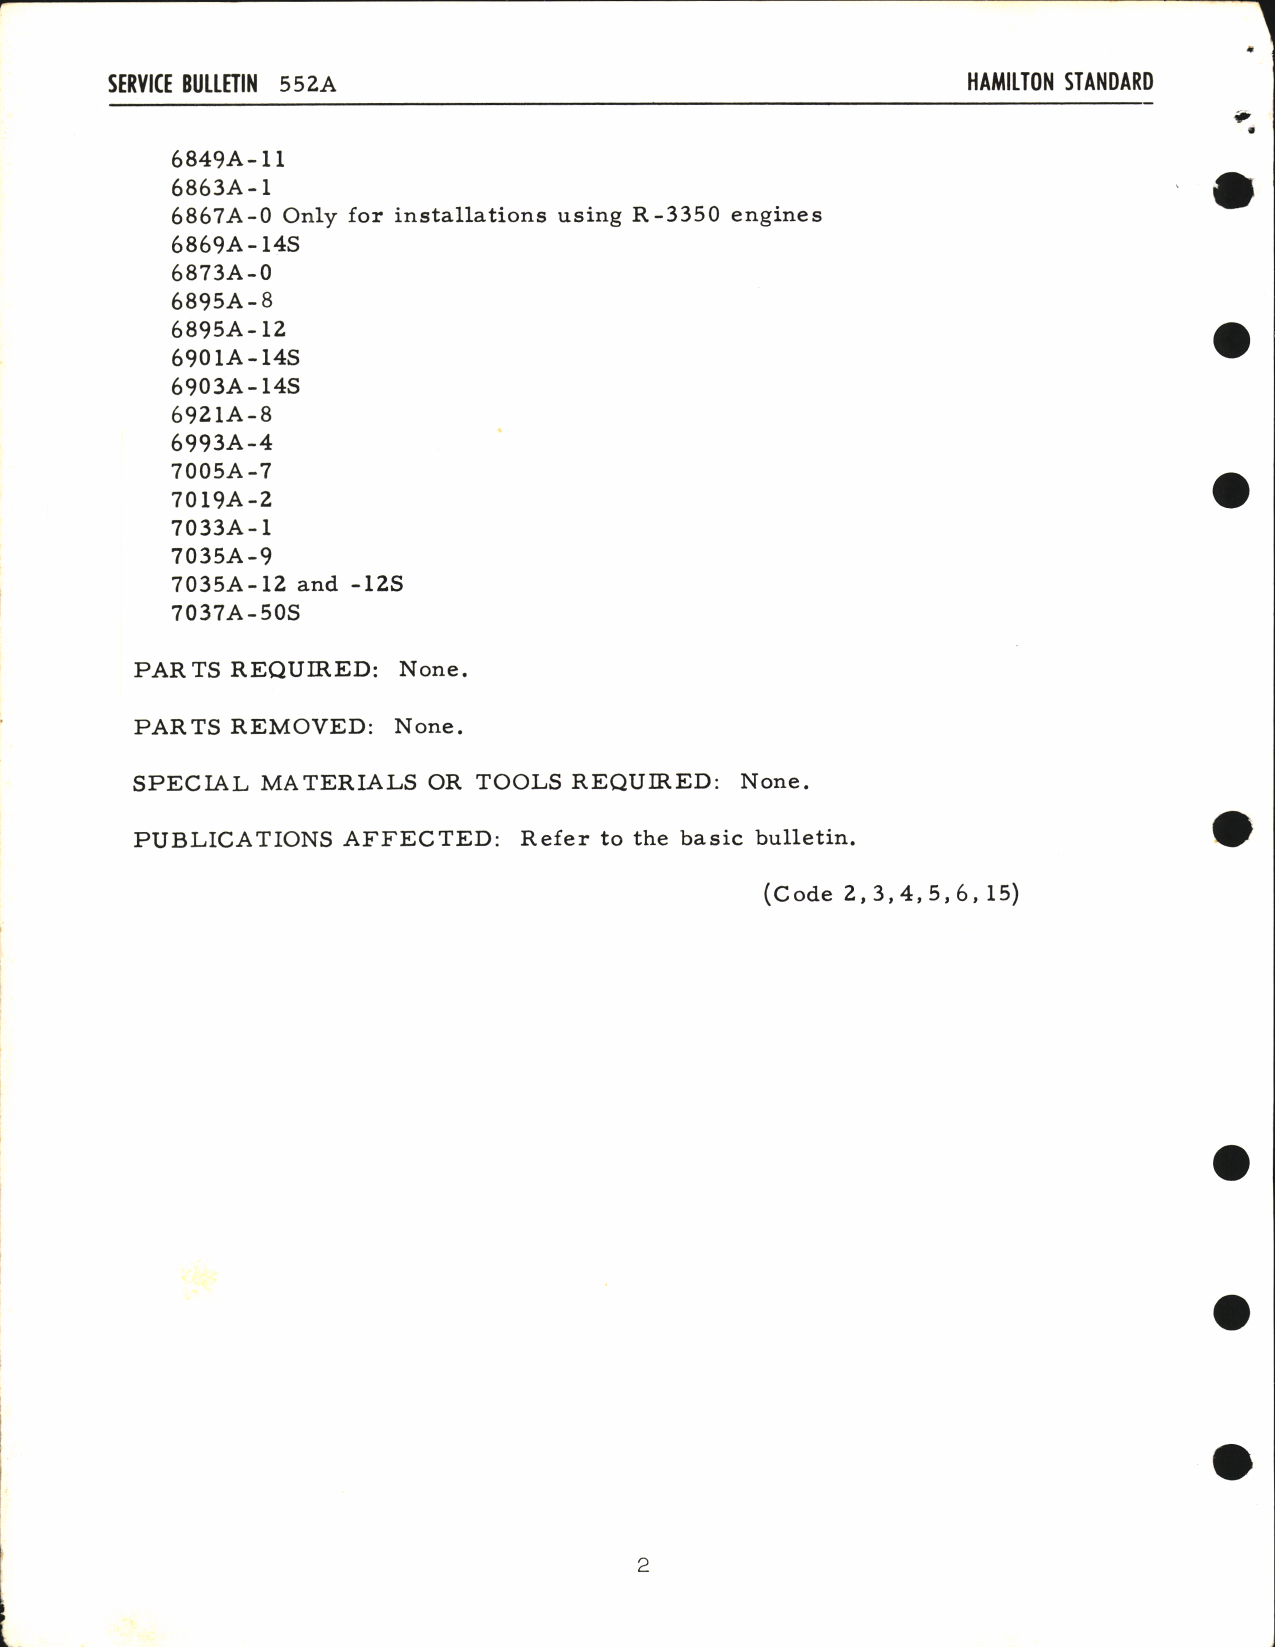 Sample page 8 from AirCorps Library document: Hamilton Standard Multiple Blade Design Dimensions and Service Bulletins